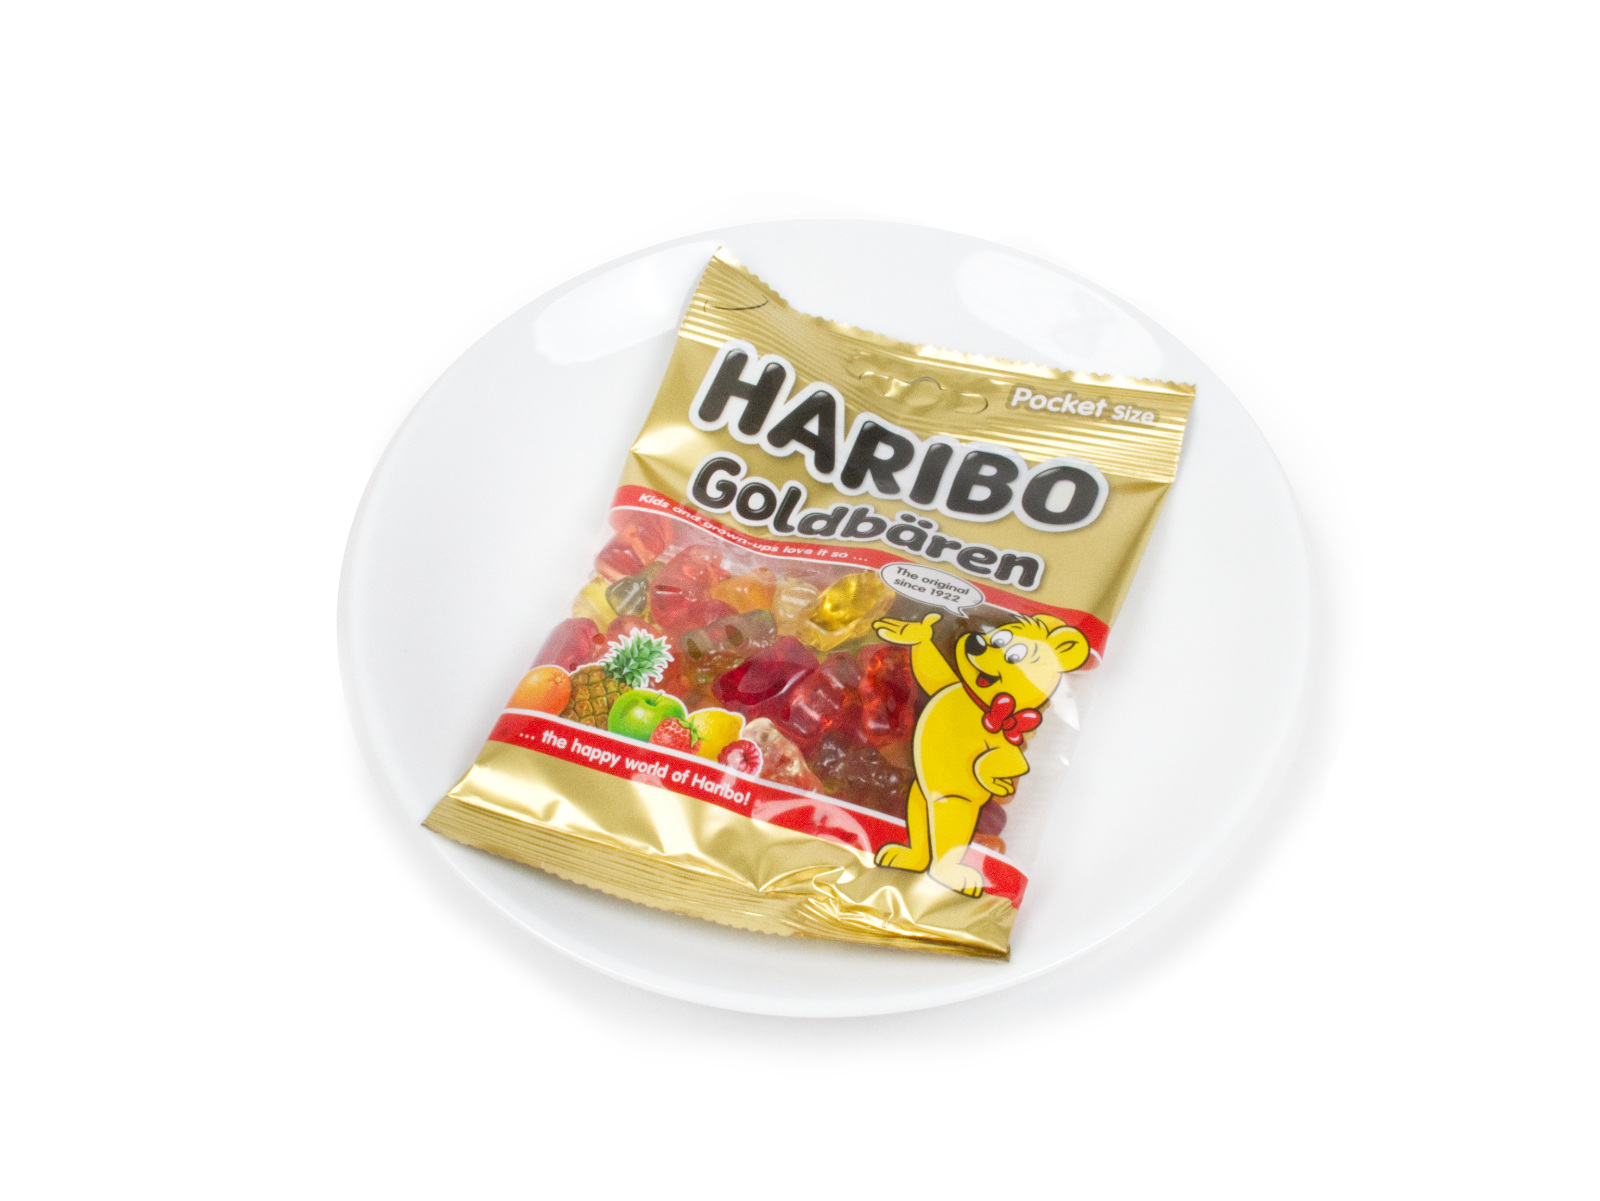 Can I open the Haribo?